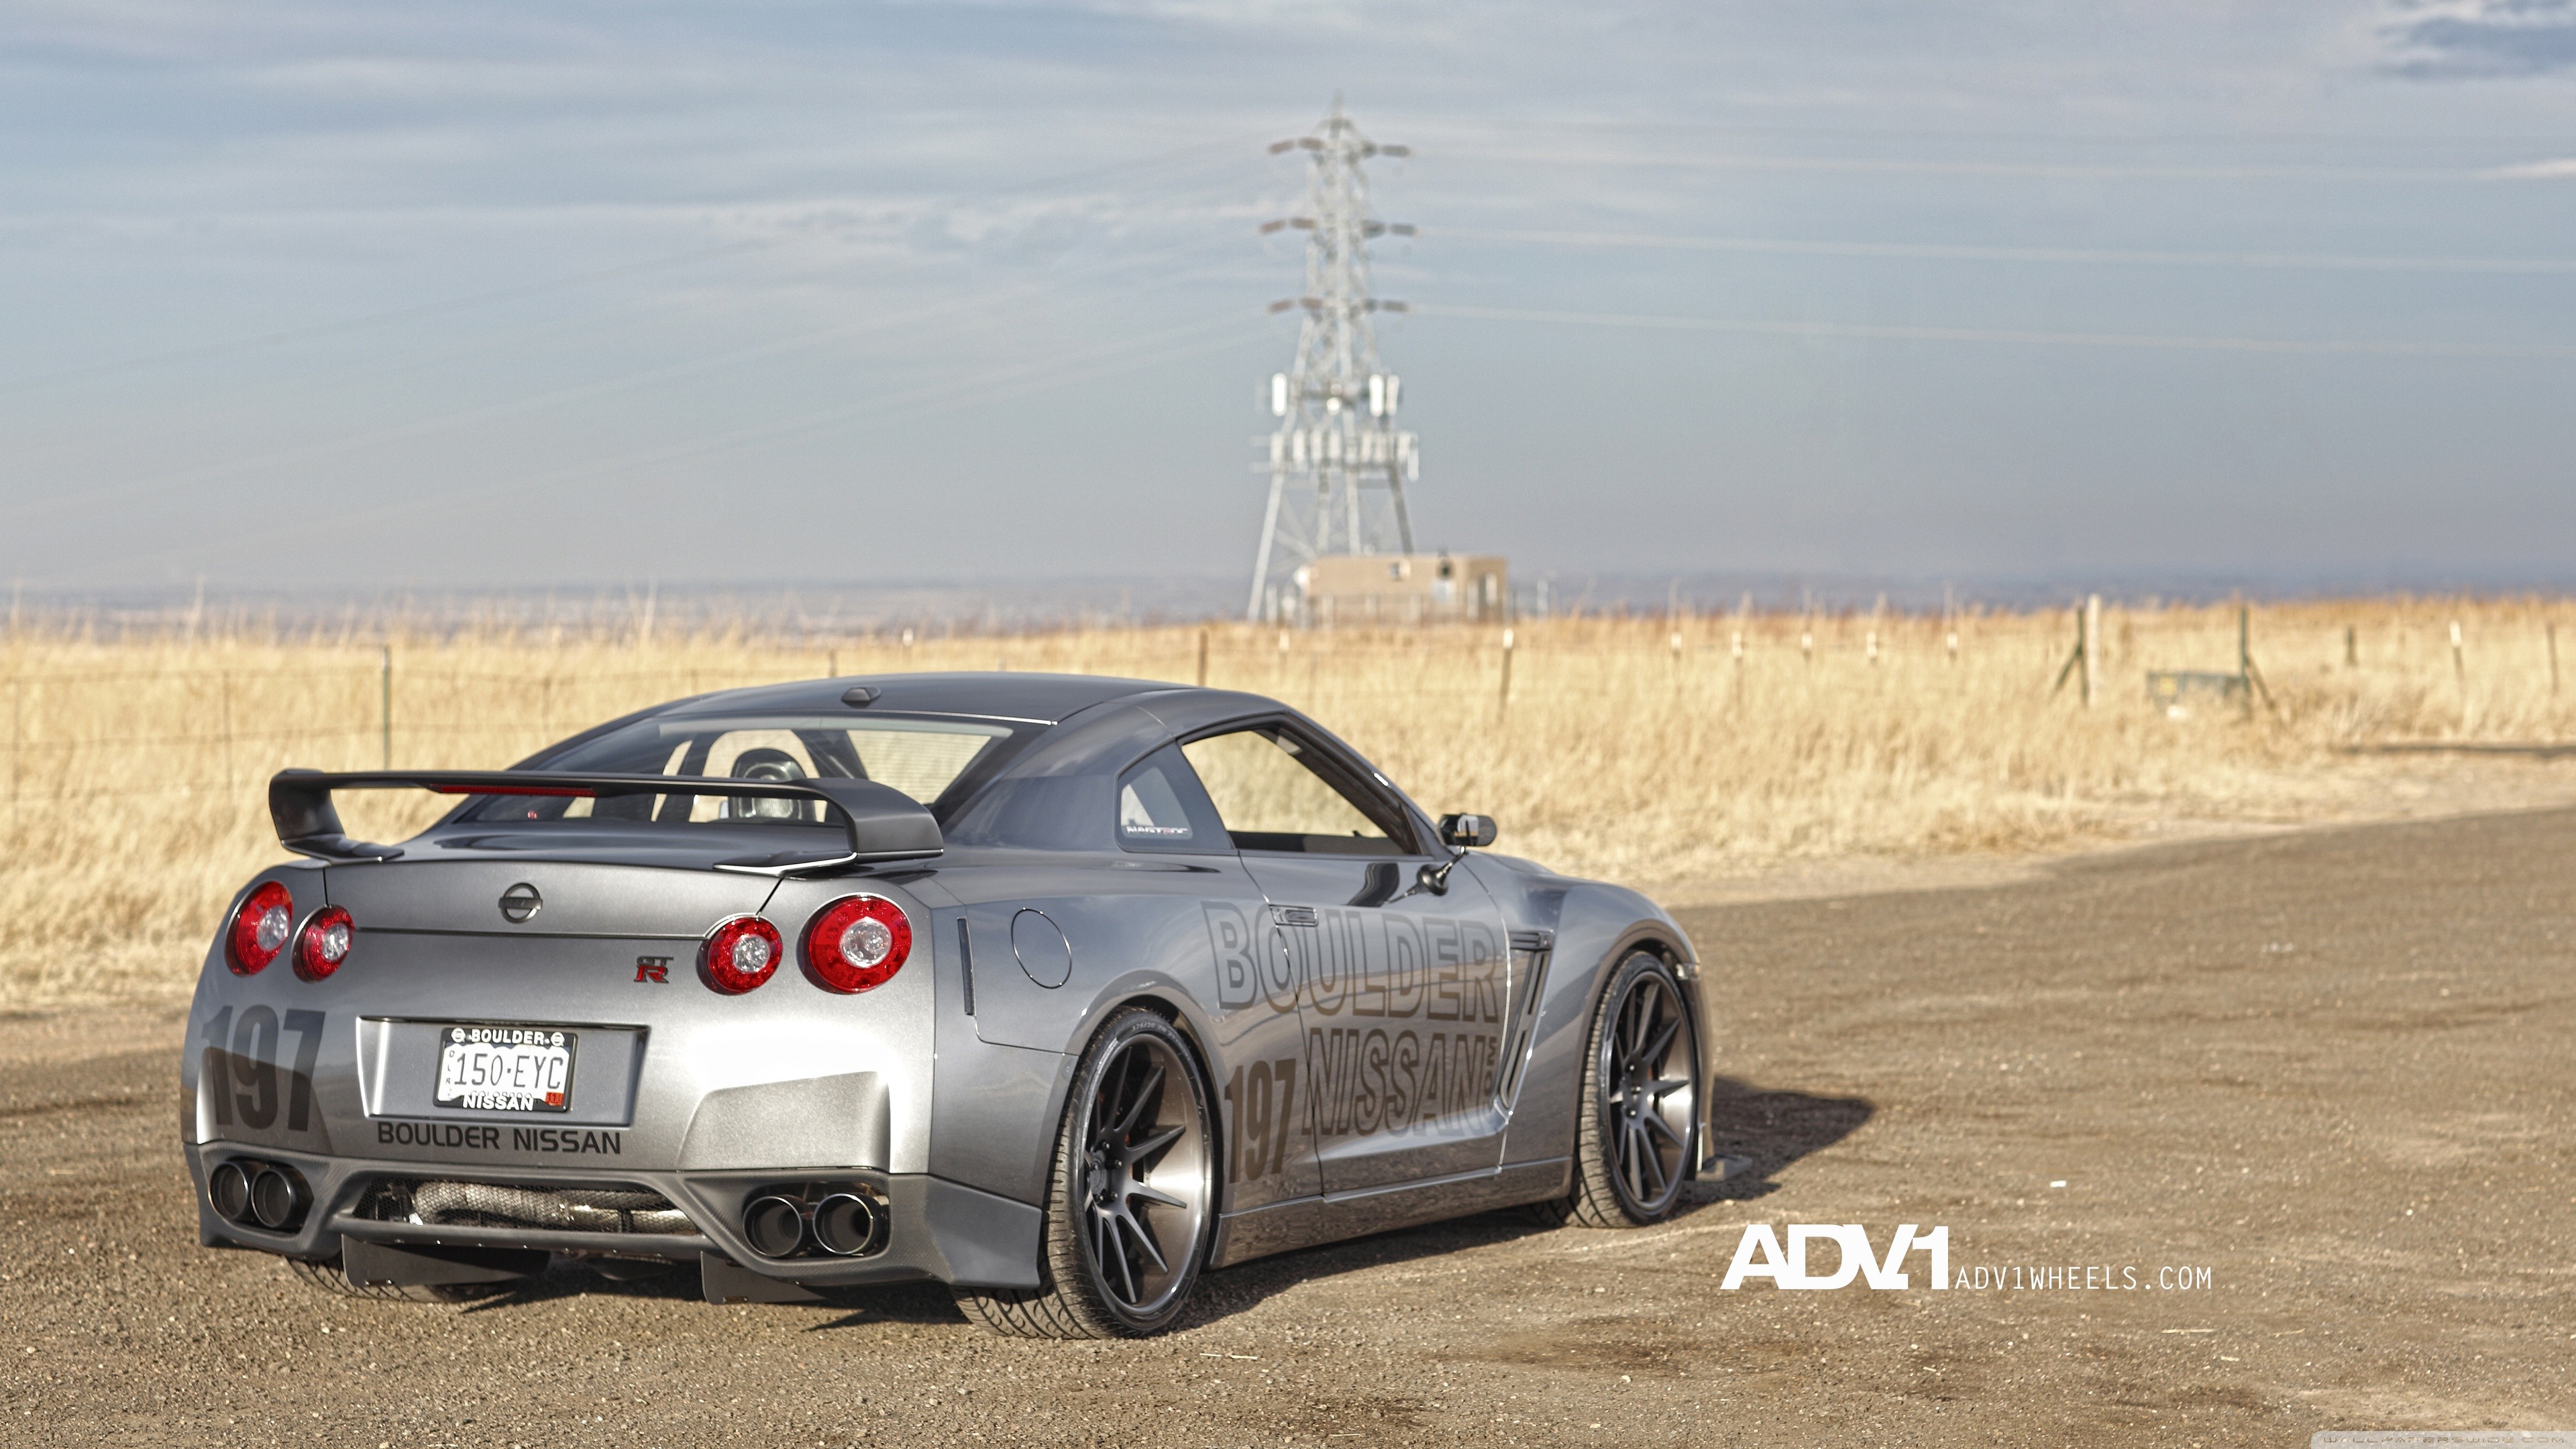 General 3840x2160 sport dust tuning car vehicle numbers silver cars Nissan Nissan GT-R Japanese cars ADV.1